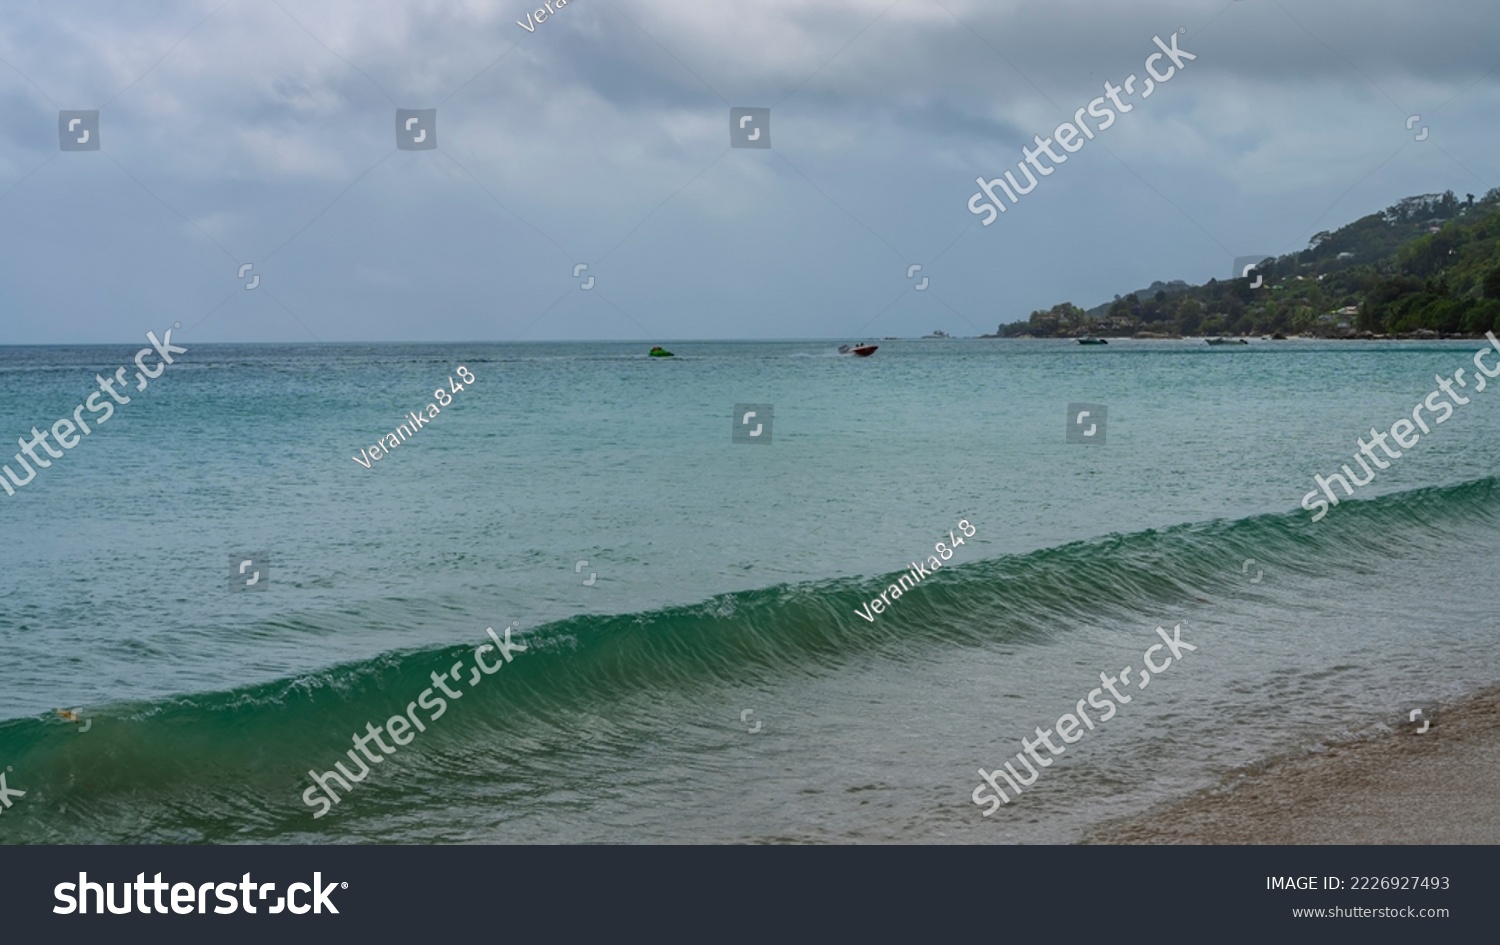 A long turquoise wave rolls onto the sandy shore. Boats are visible on the surface of the ocean. A green hill against a cloudy sky. Seychelles. Mahe. Beau Vallon beach #2226927493